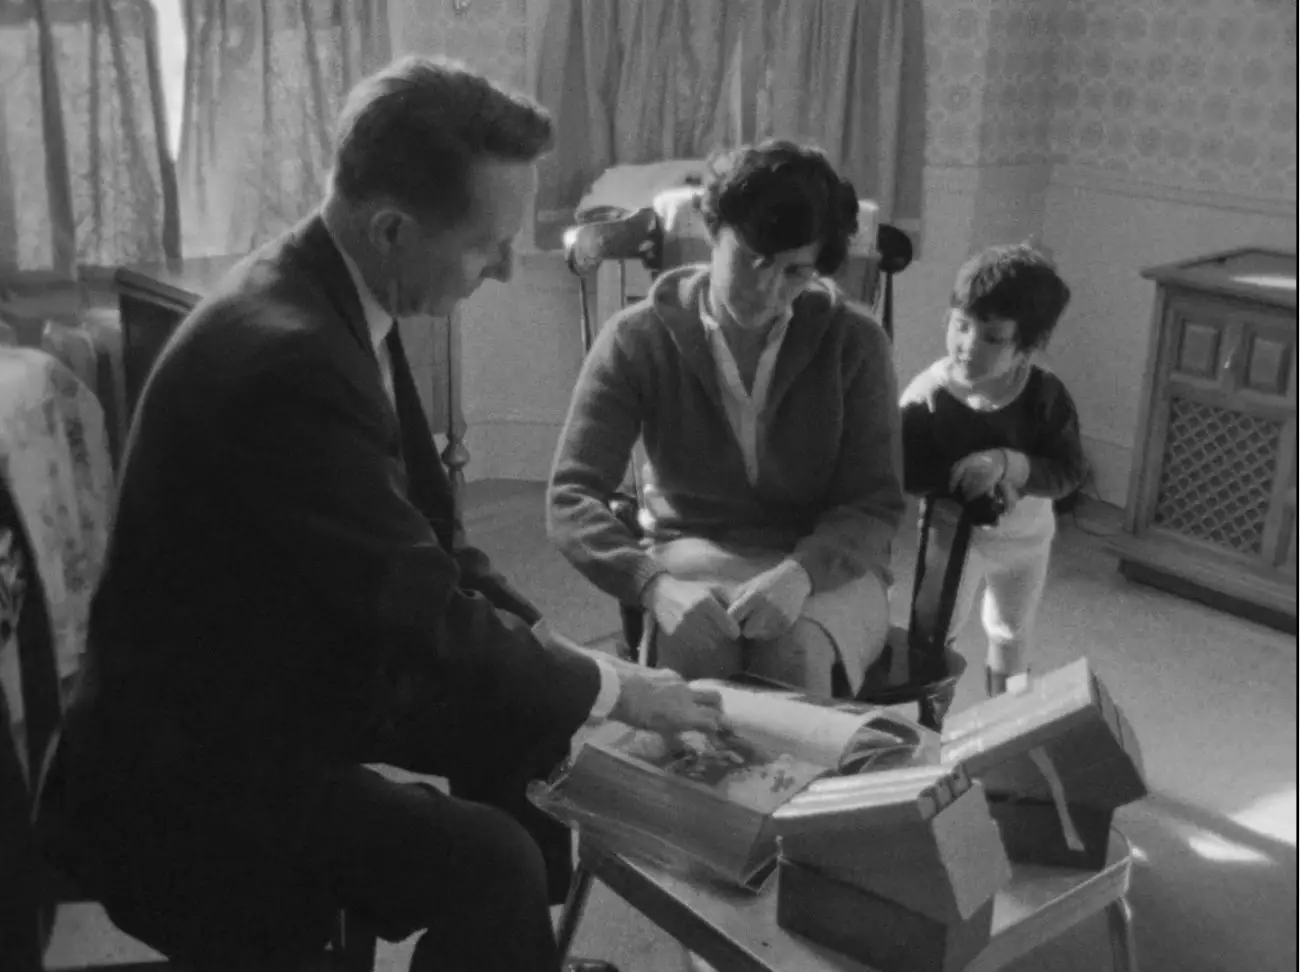 Image from Salesman: Paul Brennan (left) demonstrates an illustrated bible to a prospective customer and her daughter.